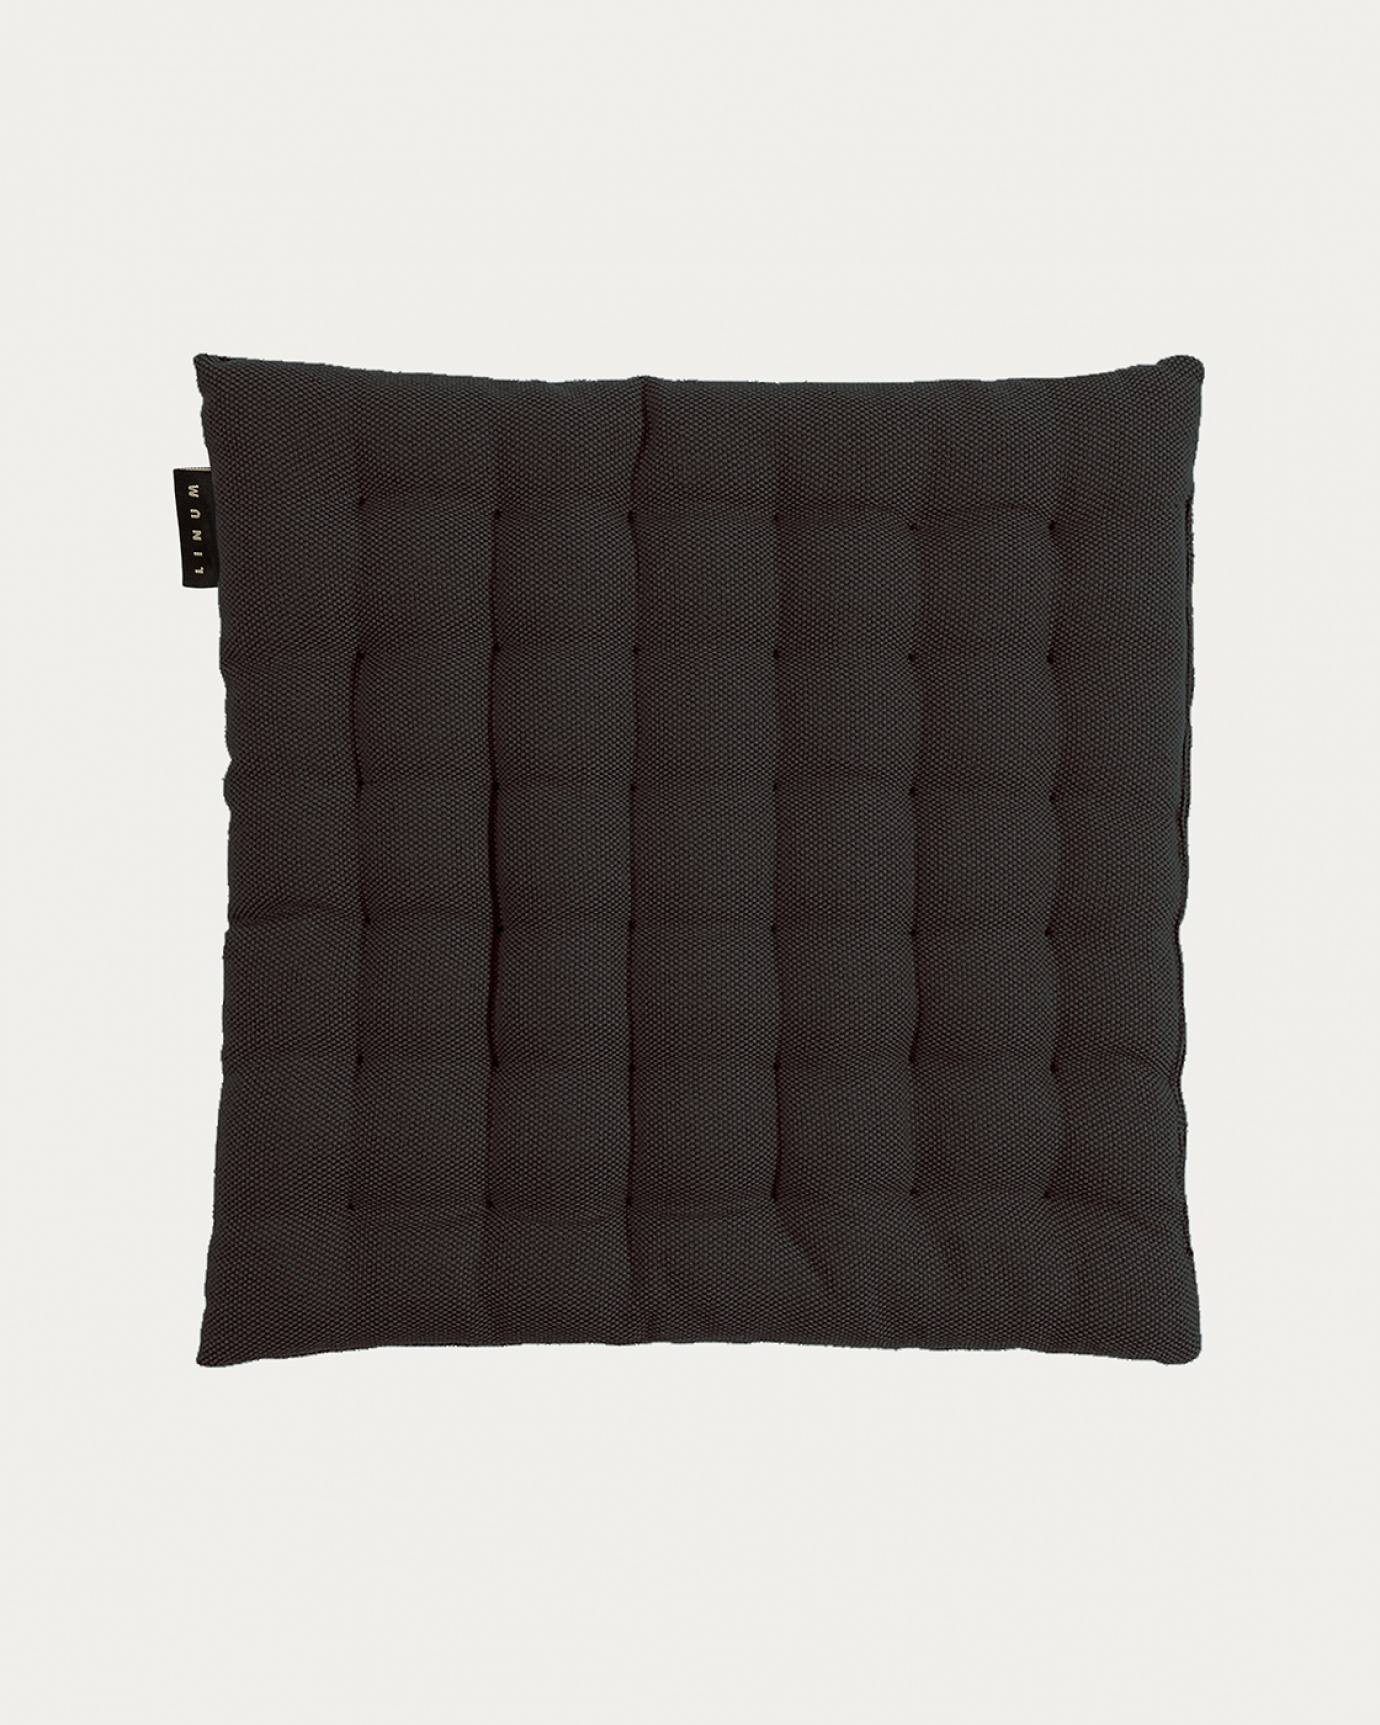 Product image black melange PEPPER seat cushion made of soft cotton with recycled polyester filling from LINUM DESIGN. Size 40x40 cm.